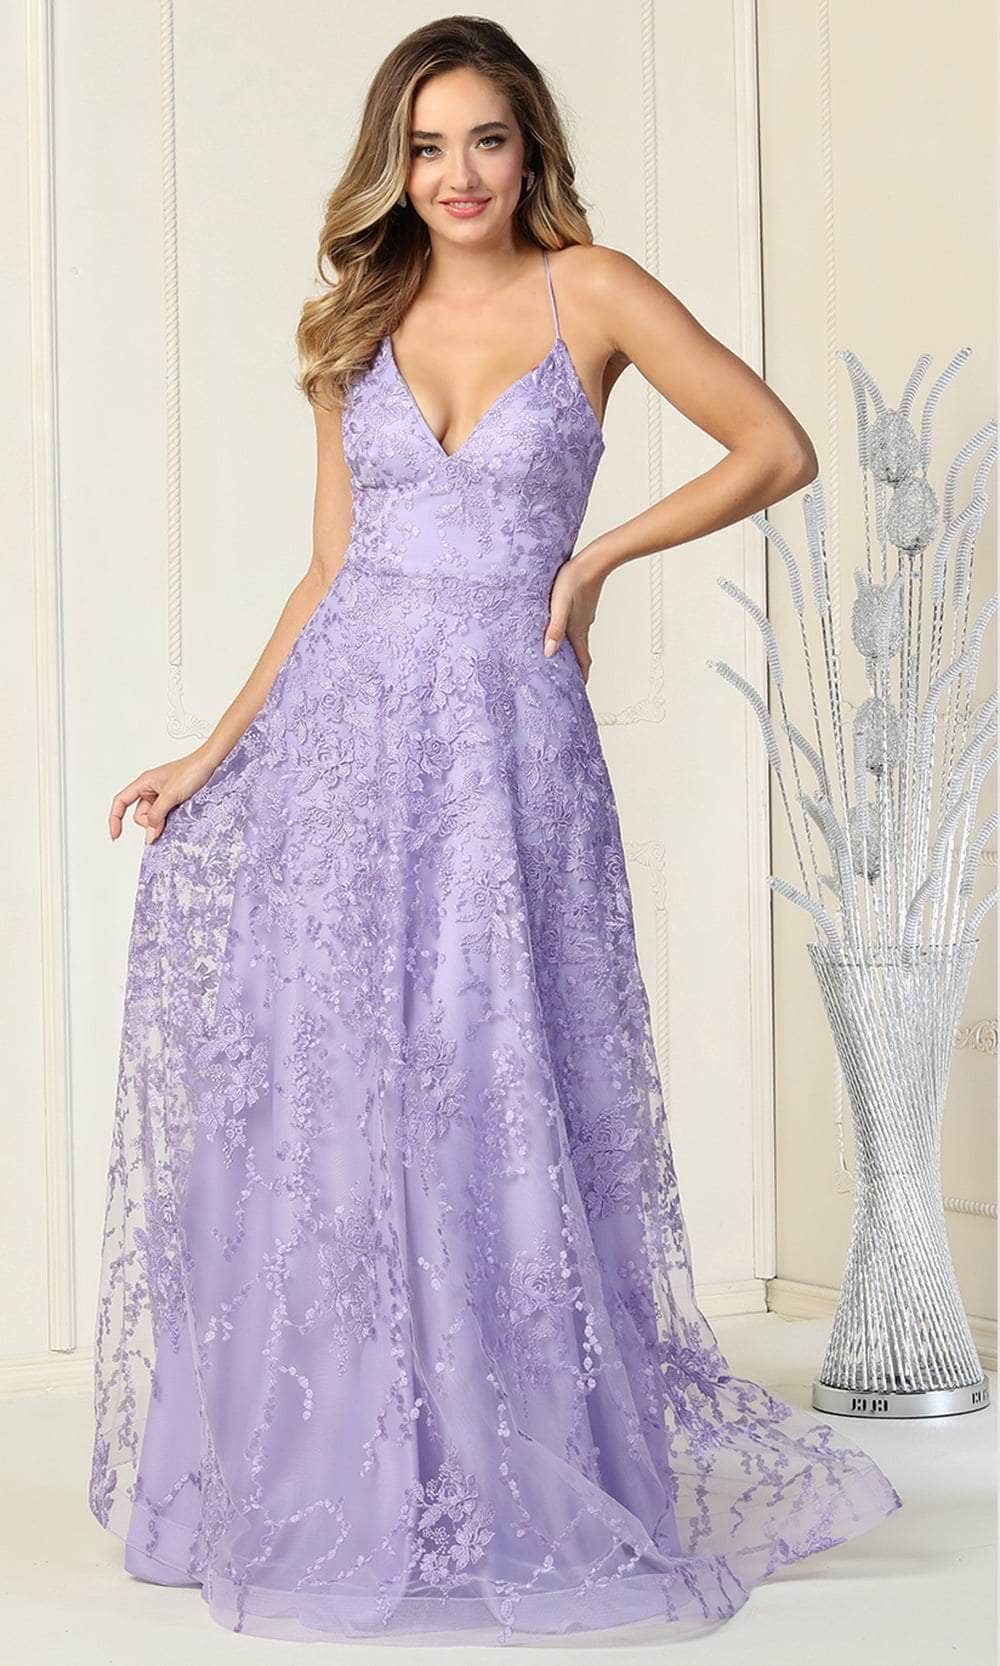 May Queen MQ1885 - V Neck Lace-Up Back Bridal Gown In Purple